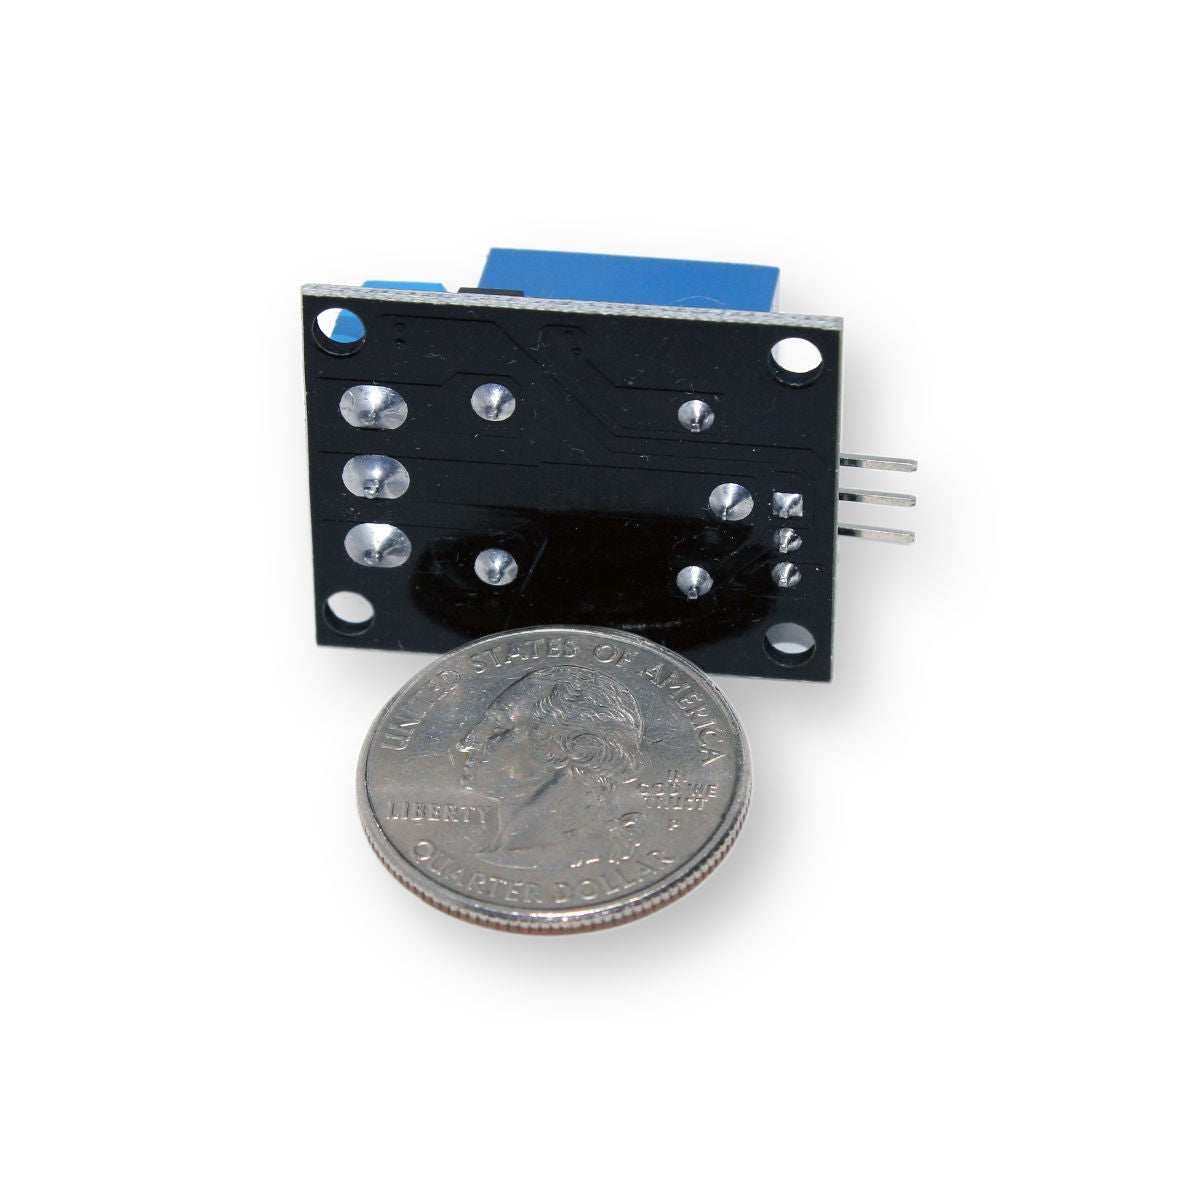 1 Channel Relay Module (Active High Control)